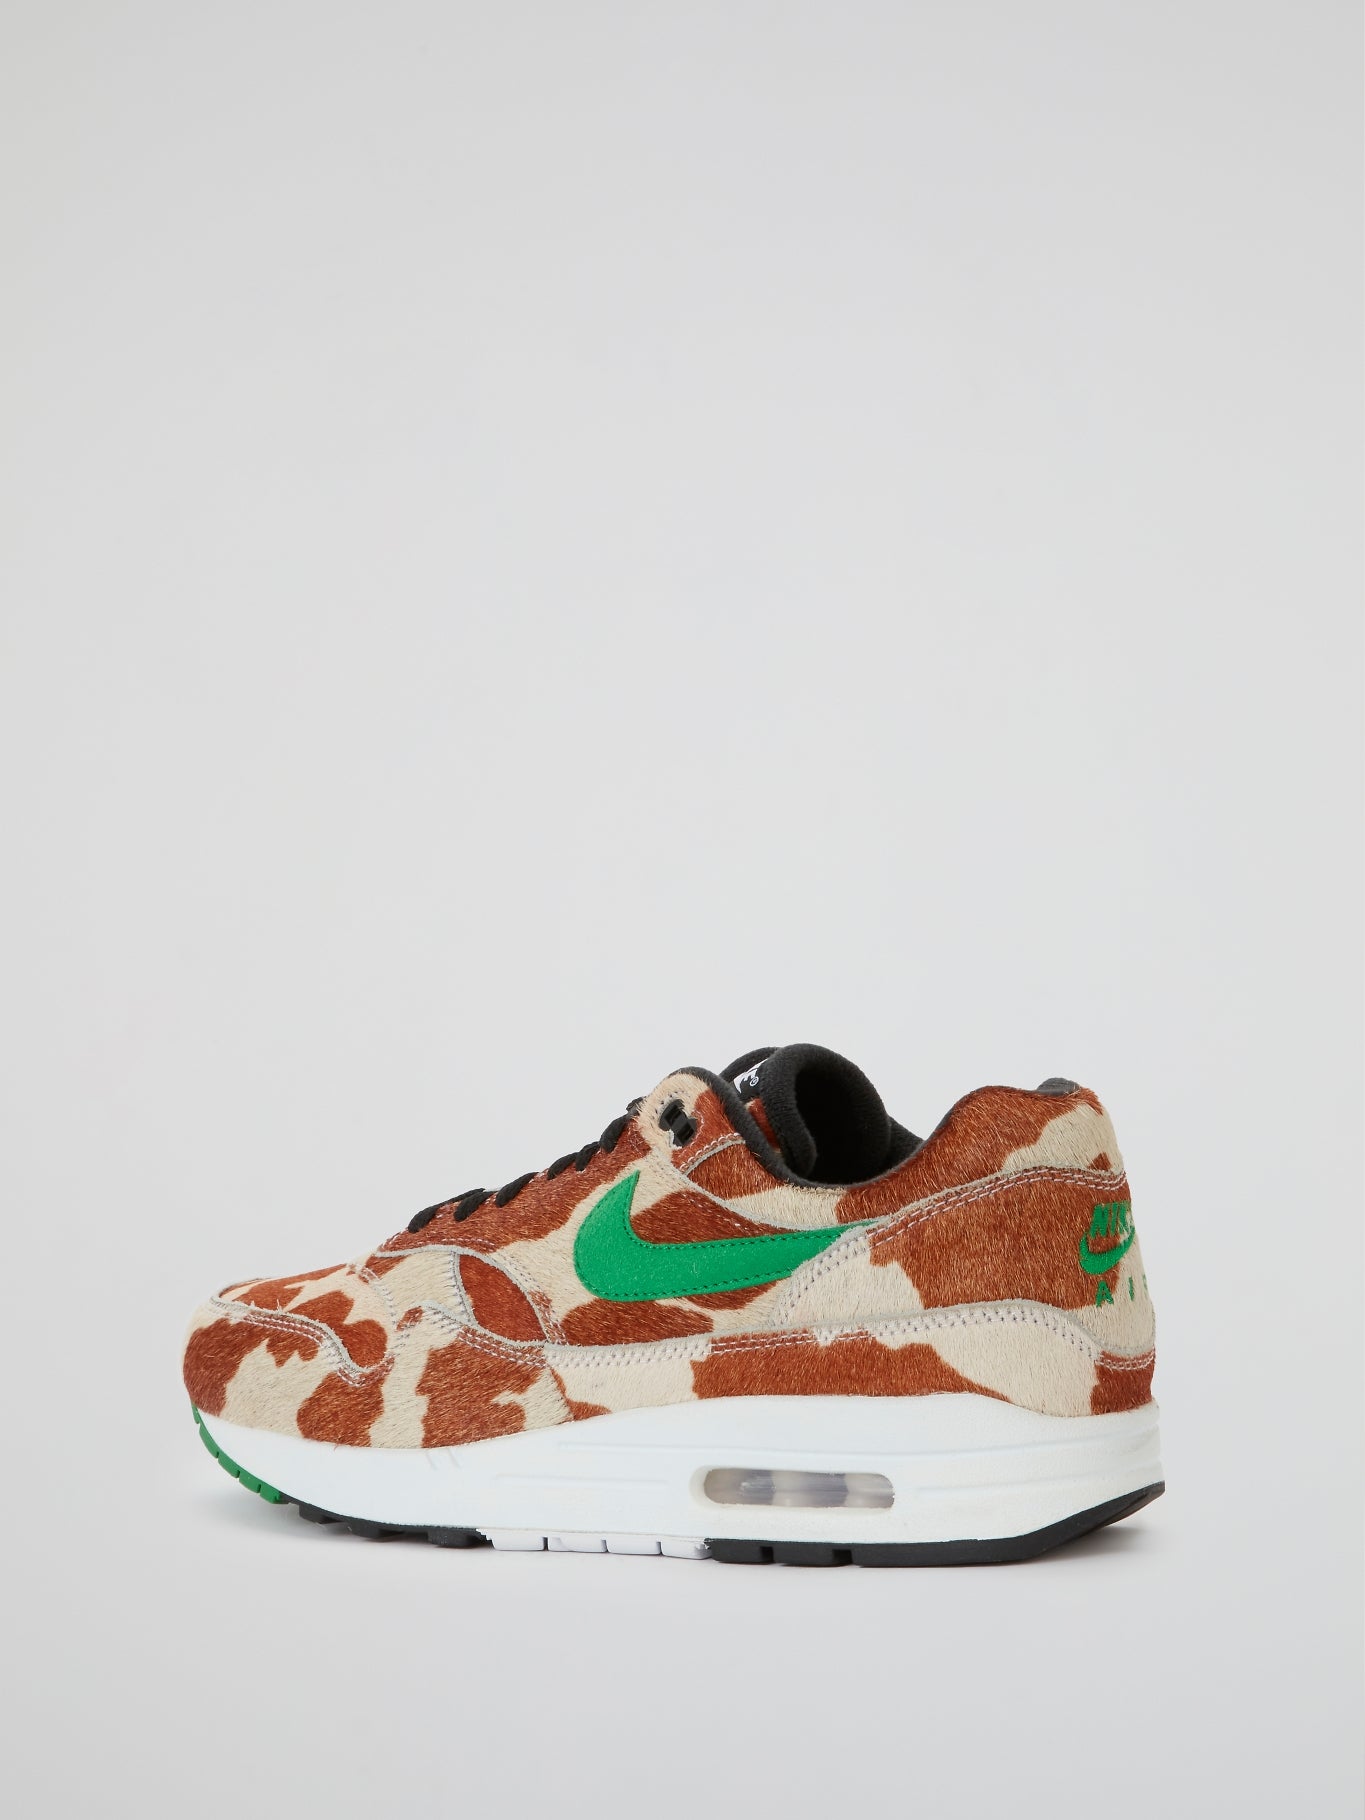 Atmos x Air Max 1 DLX Animal Pack Sneakers (Size 9)